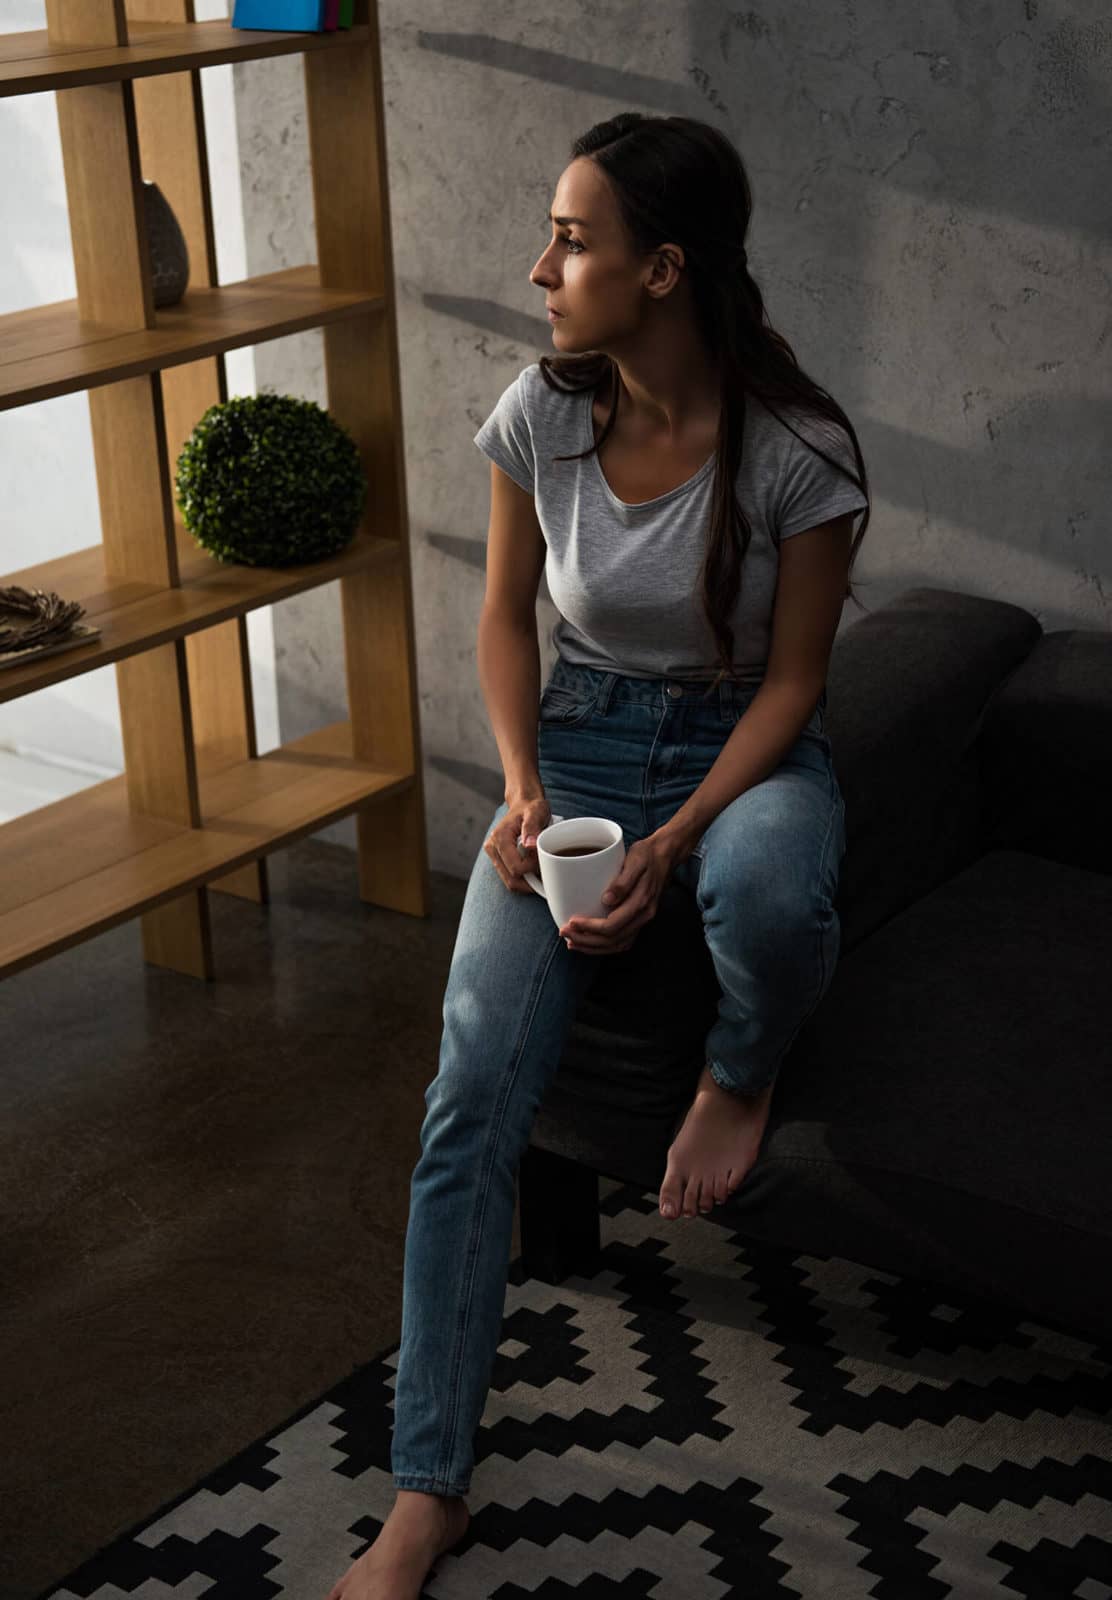 Woman sitting on a couch with coffee detoxing from benzos